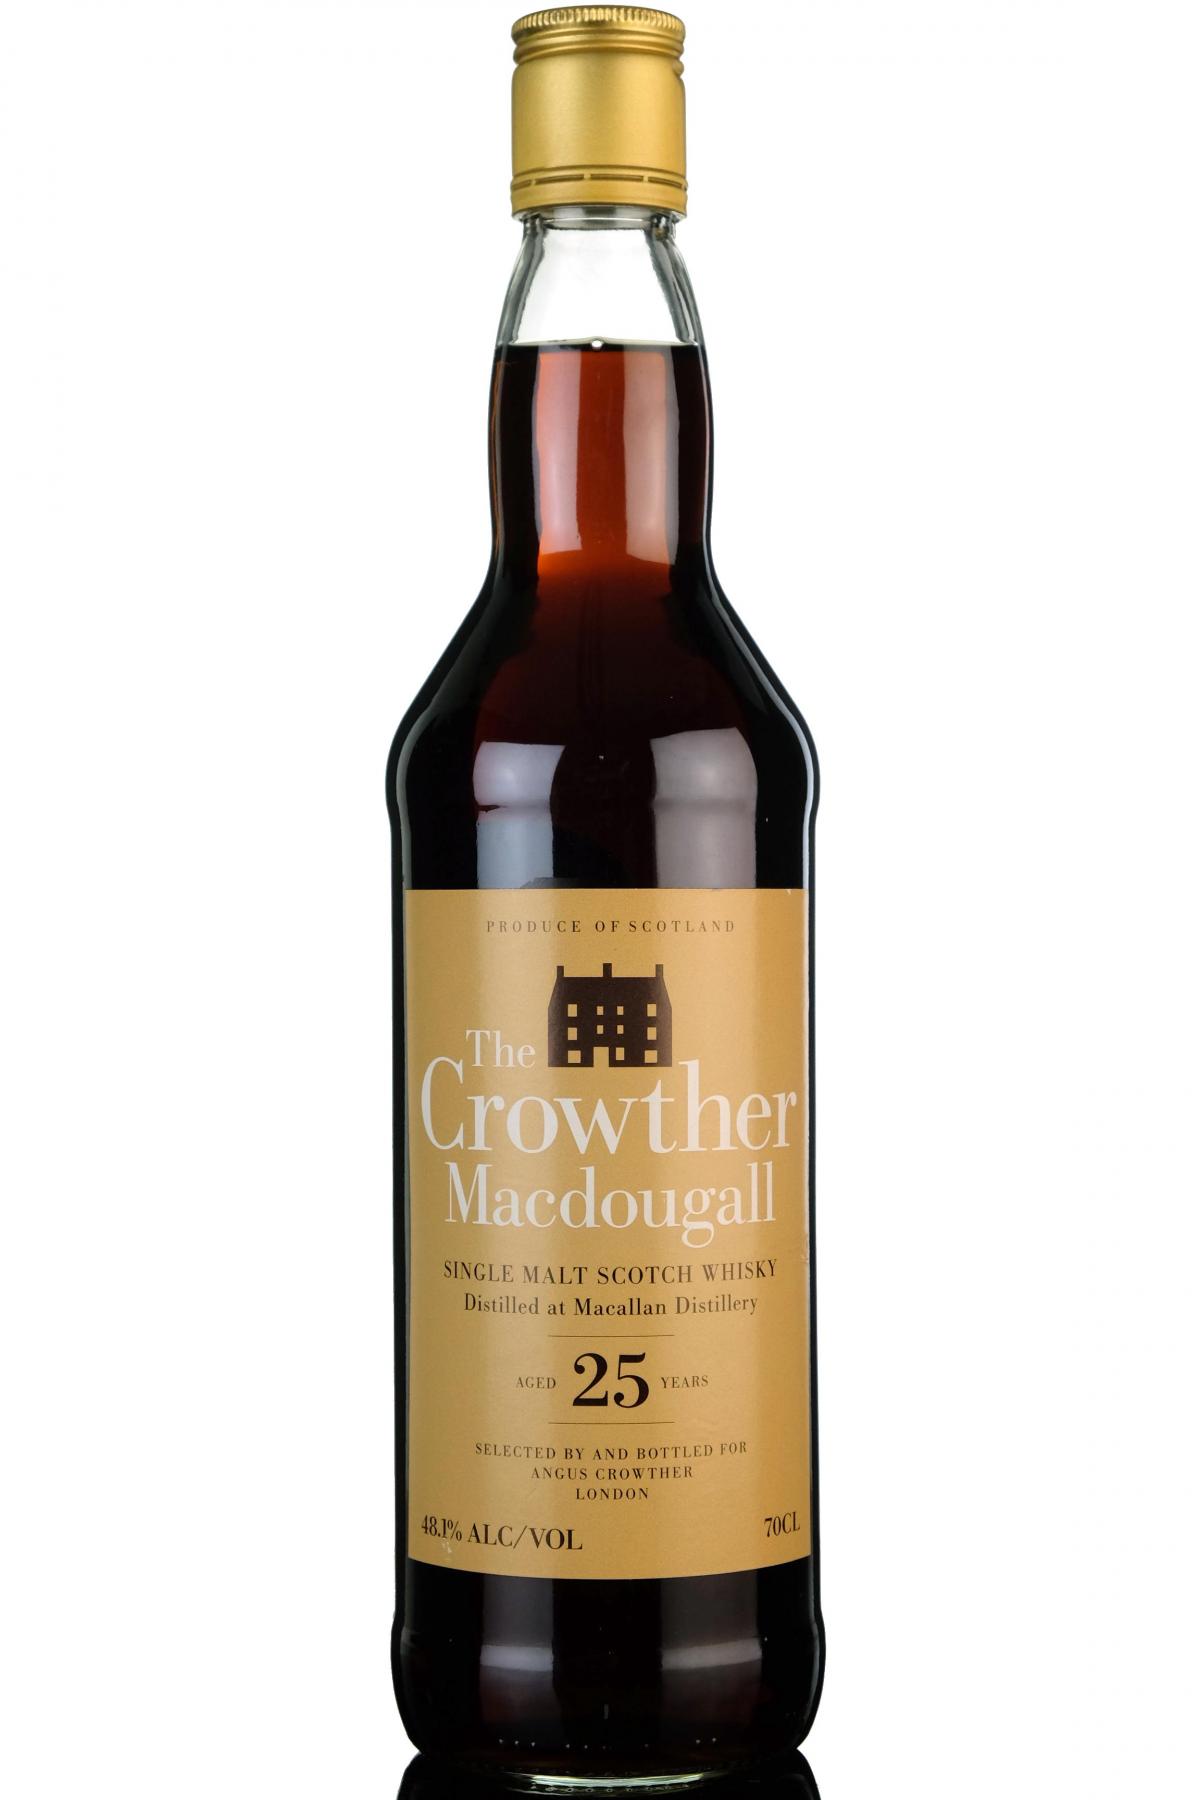 Macallan 25 Year Old - Crowther Macdougall